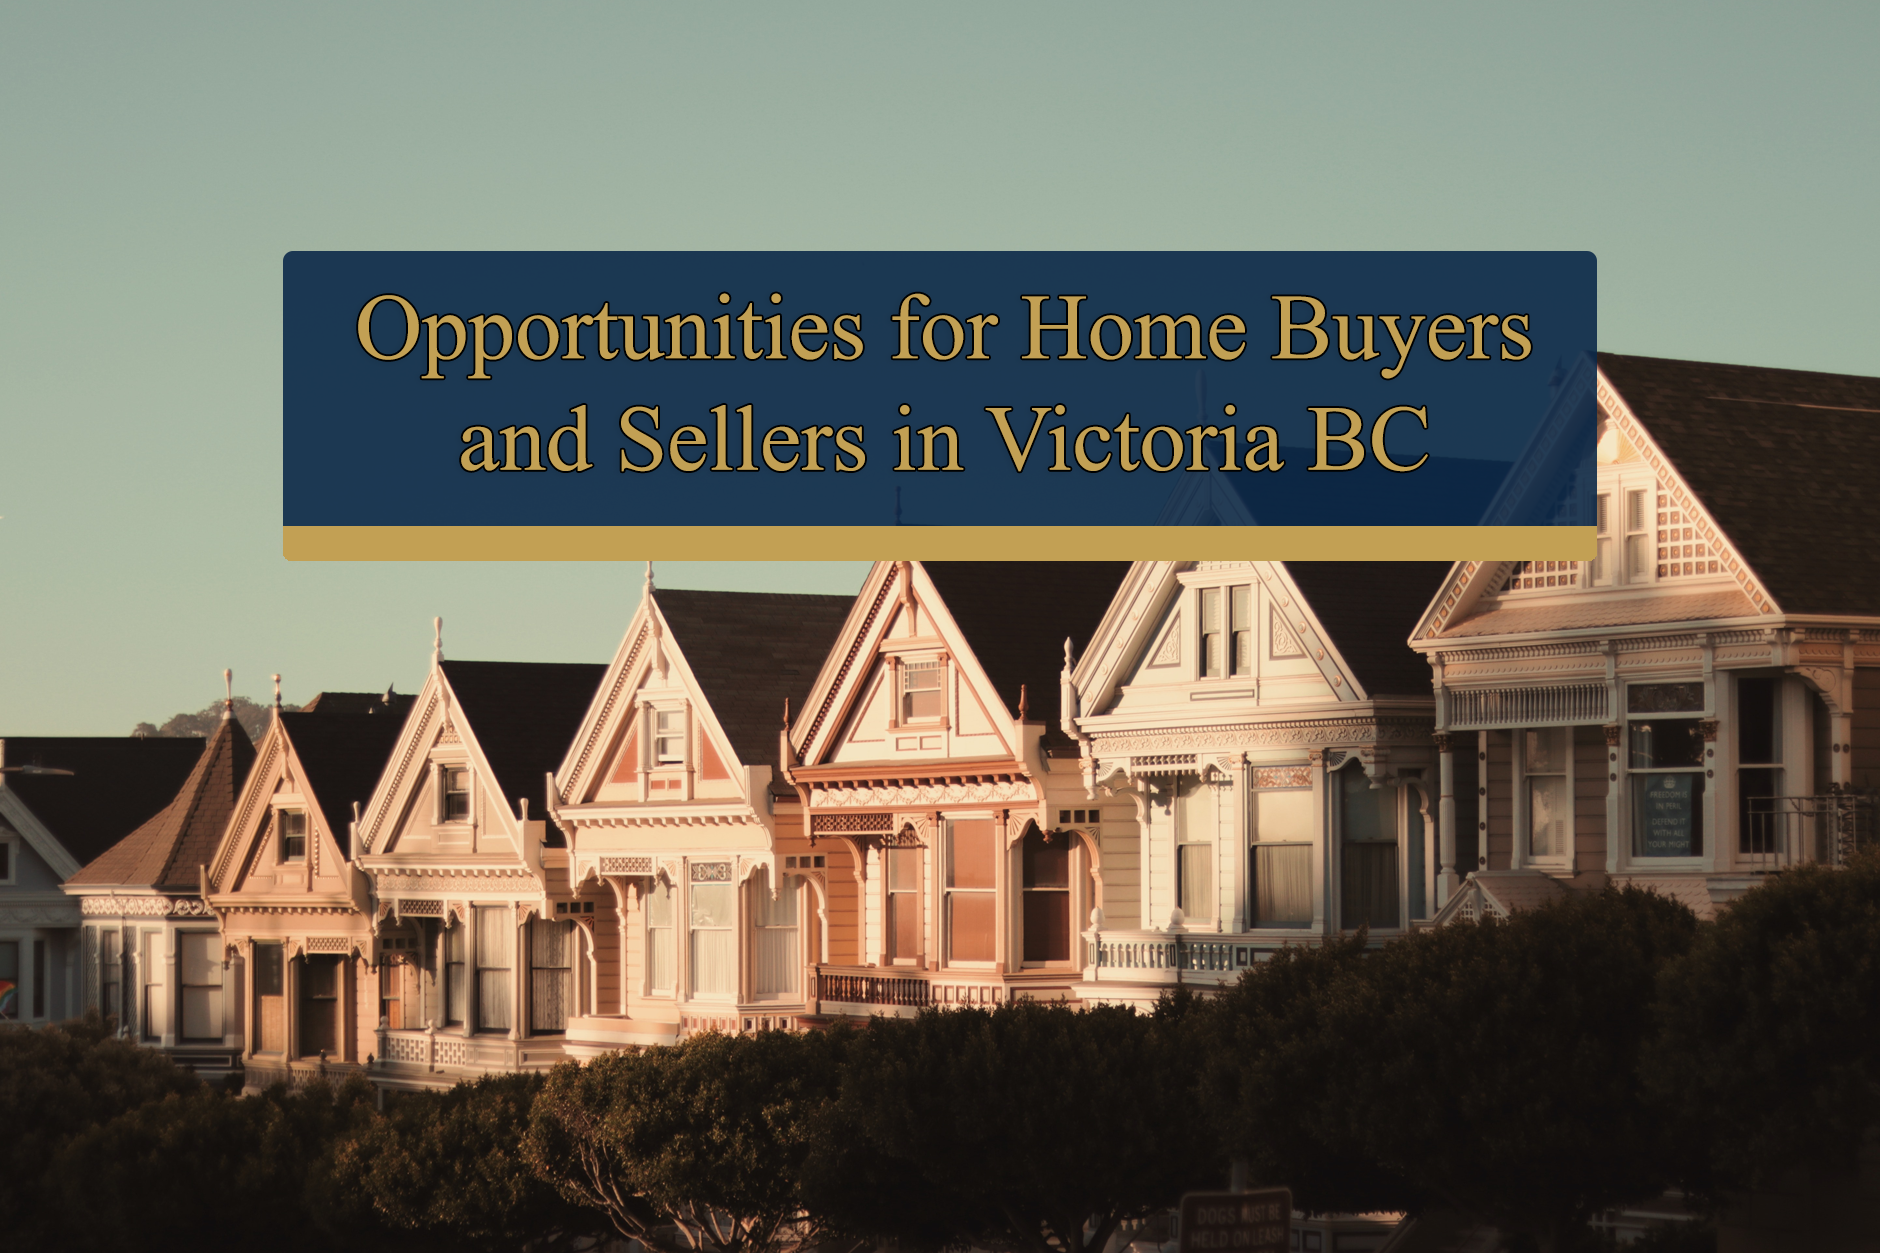 Opportunities for Home Buyers and Sellers in Victoria BC